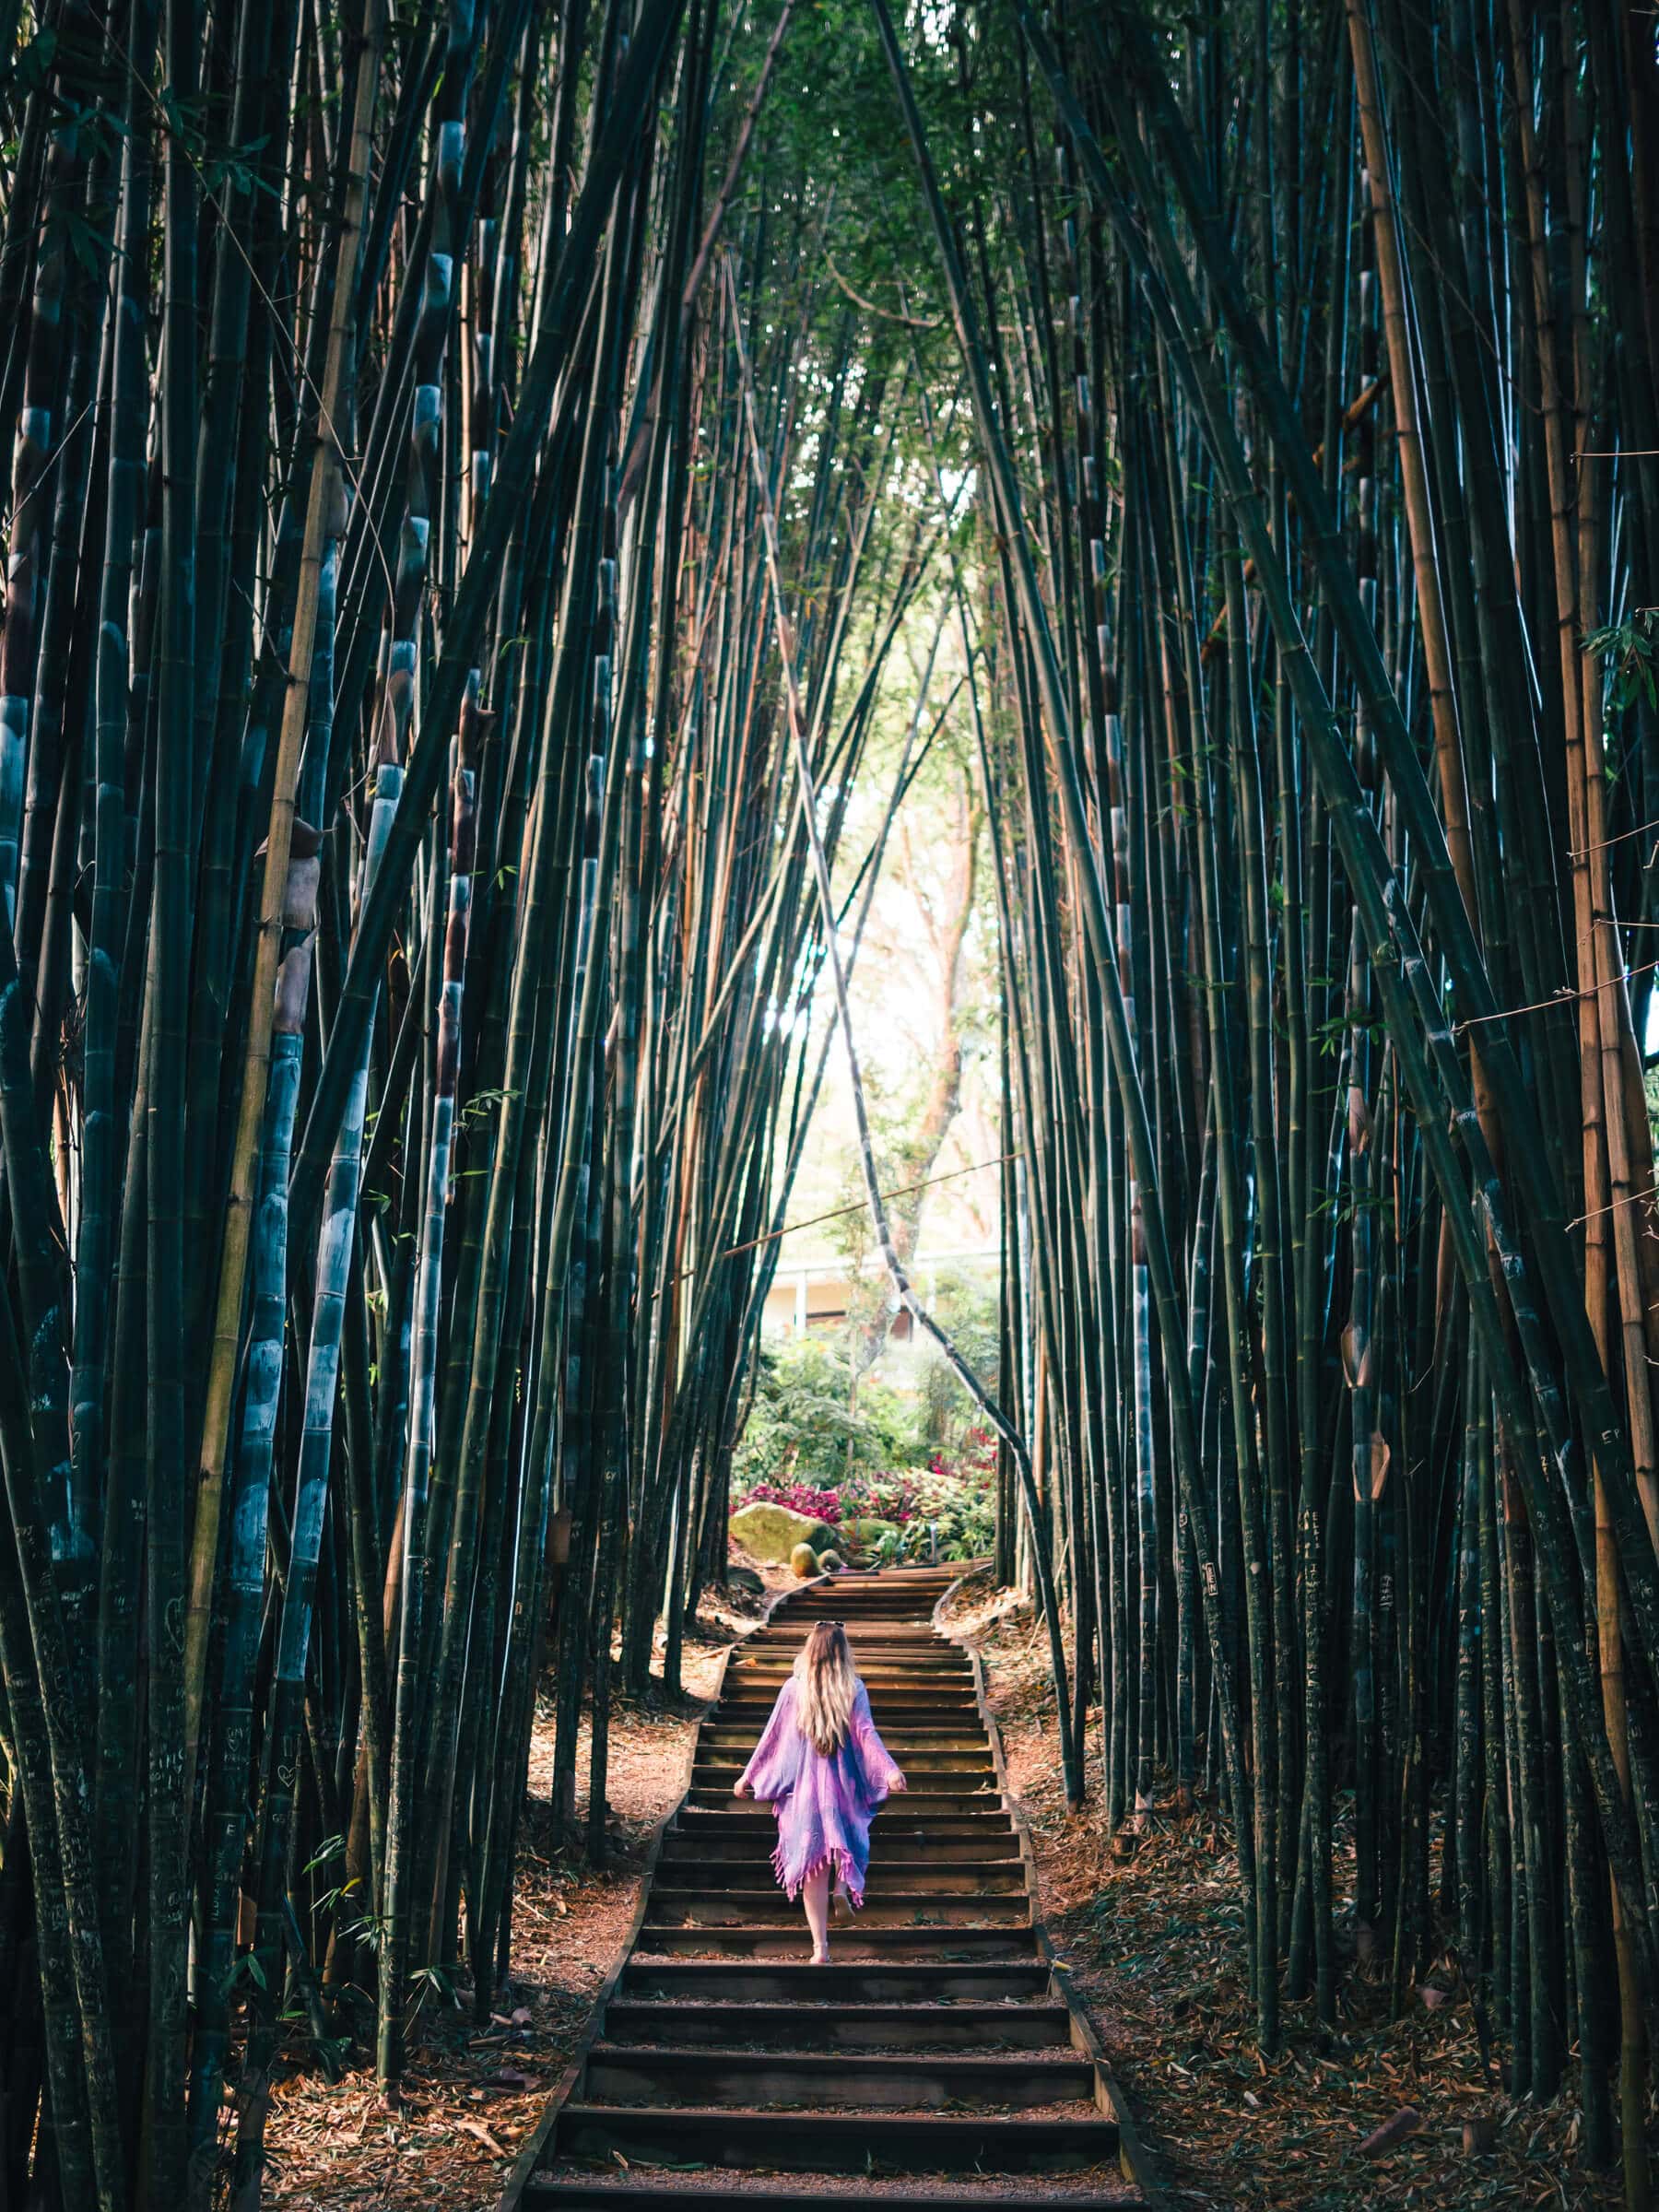 The incredibly stunning Crystal Castle & shambhala Gardens located in the Byron Bay hinterlands - The enchanted bamboo alley